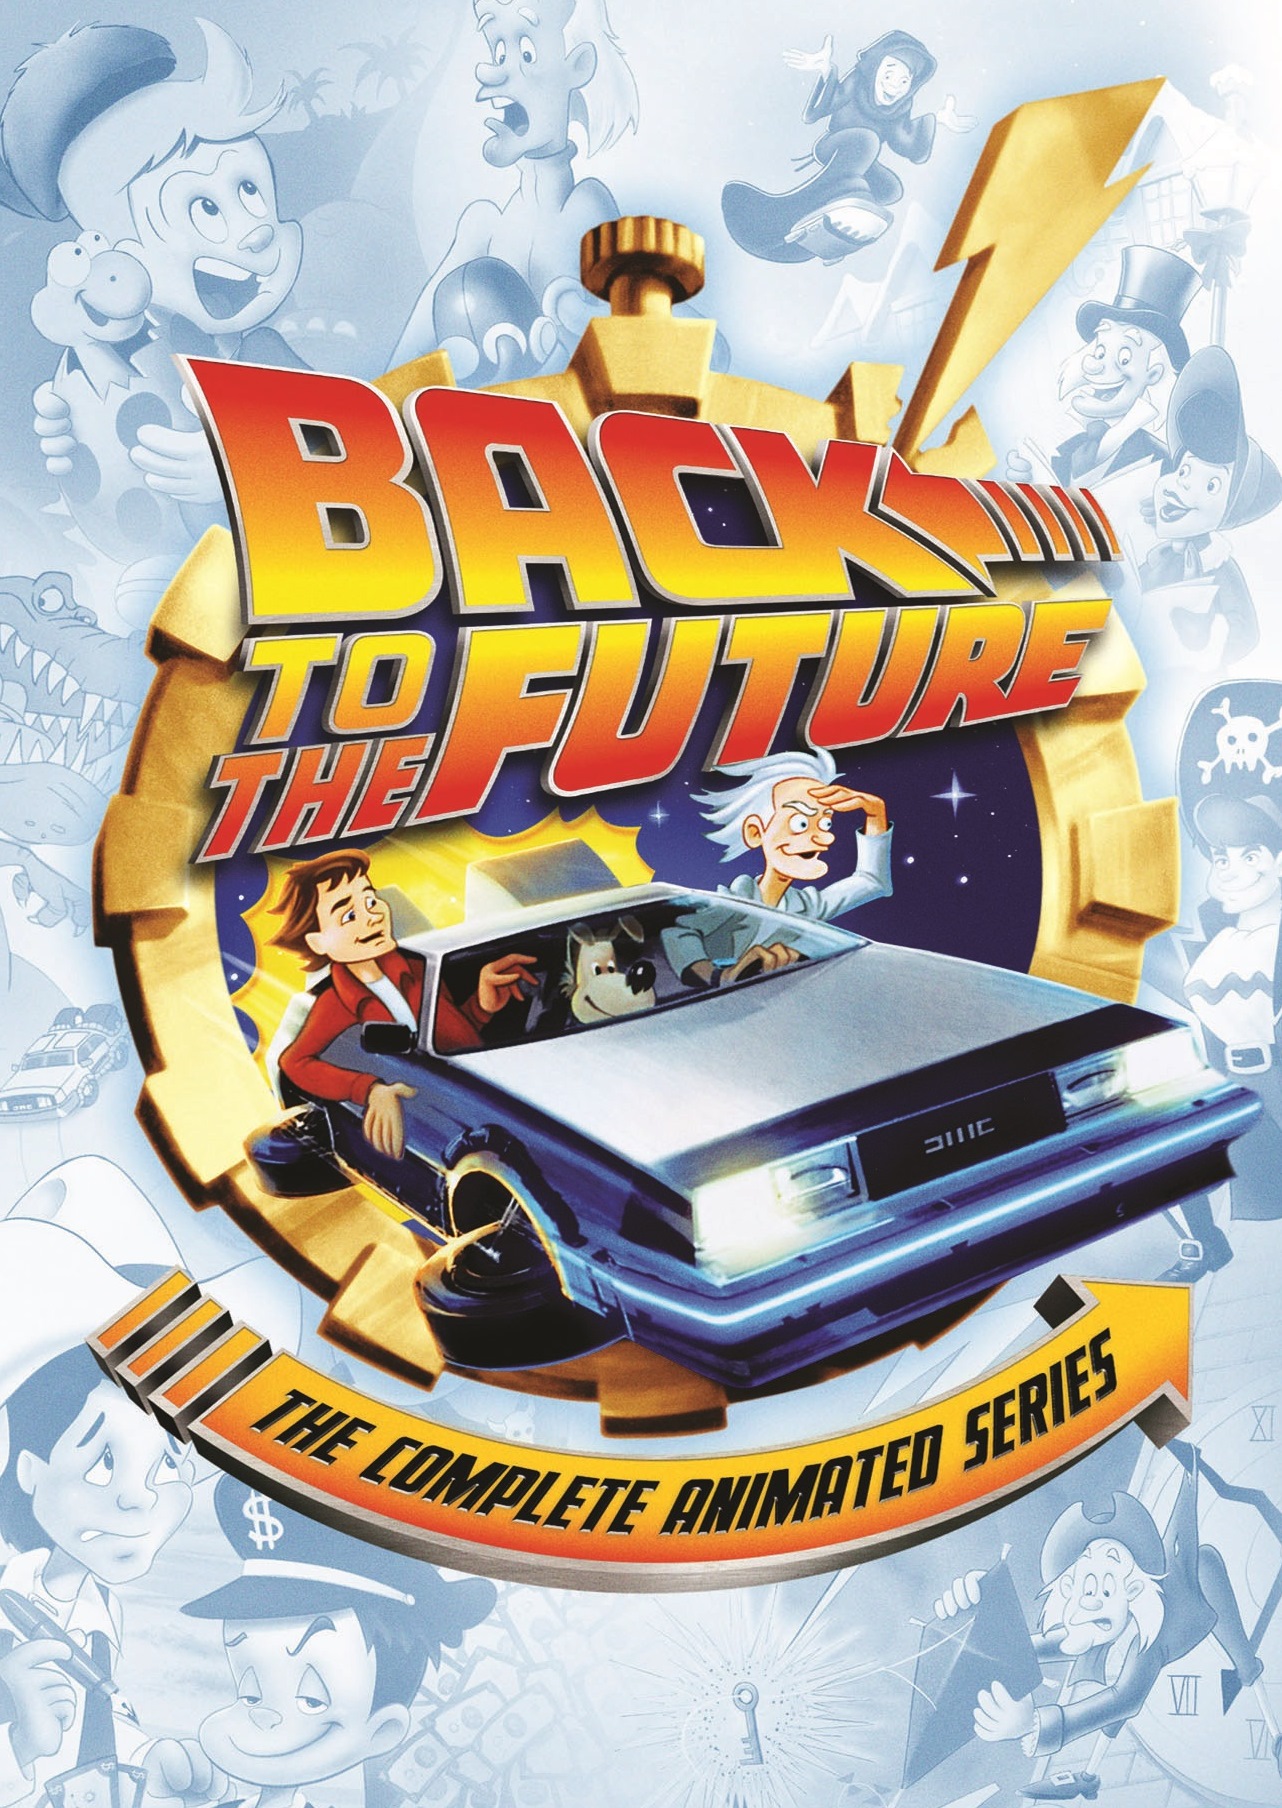 Back to the Future: The Complete Animated Series [DVD]